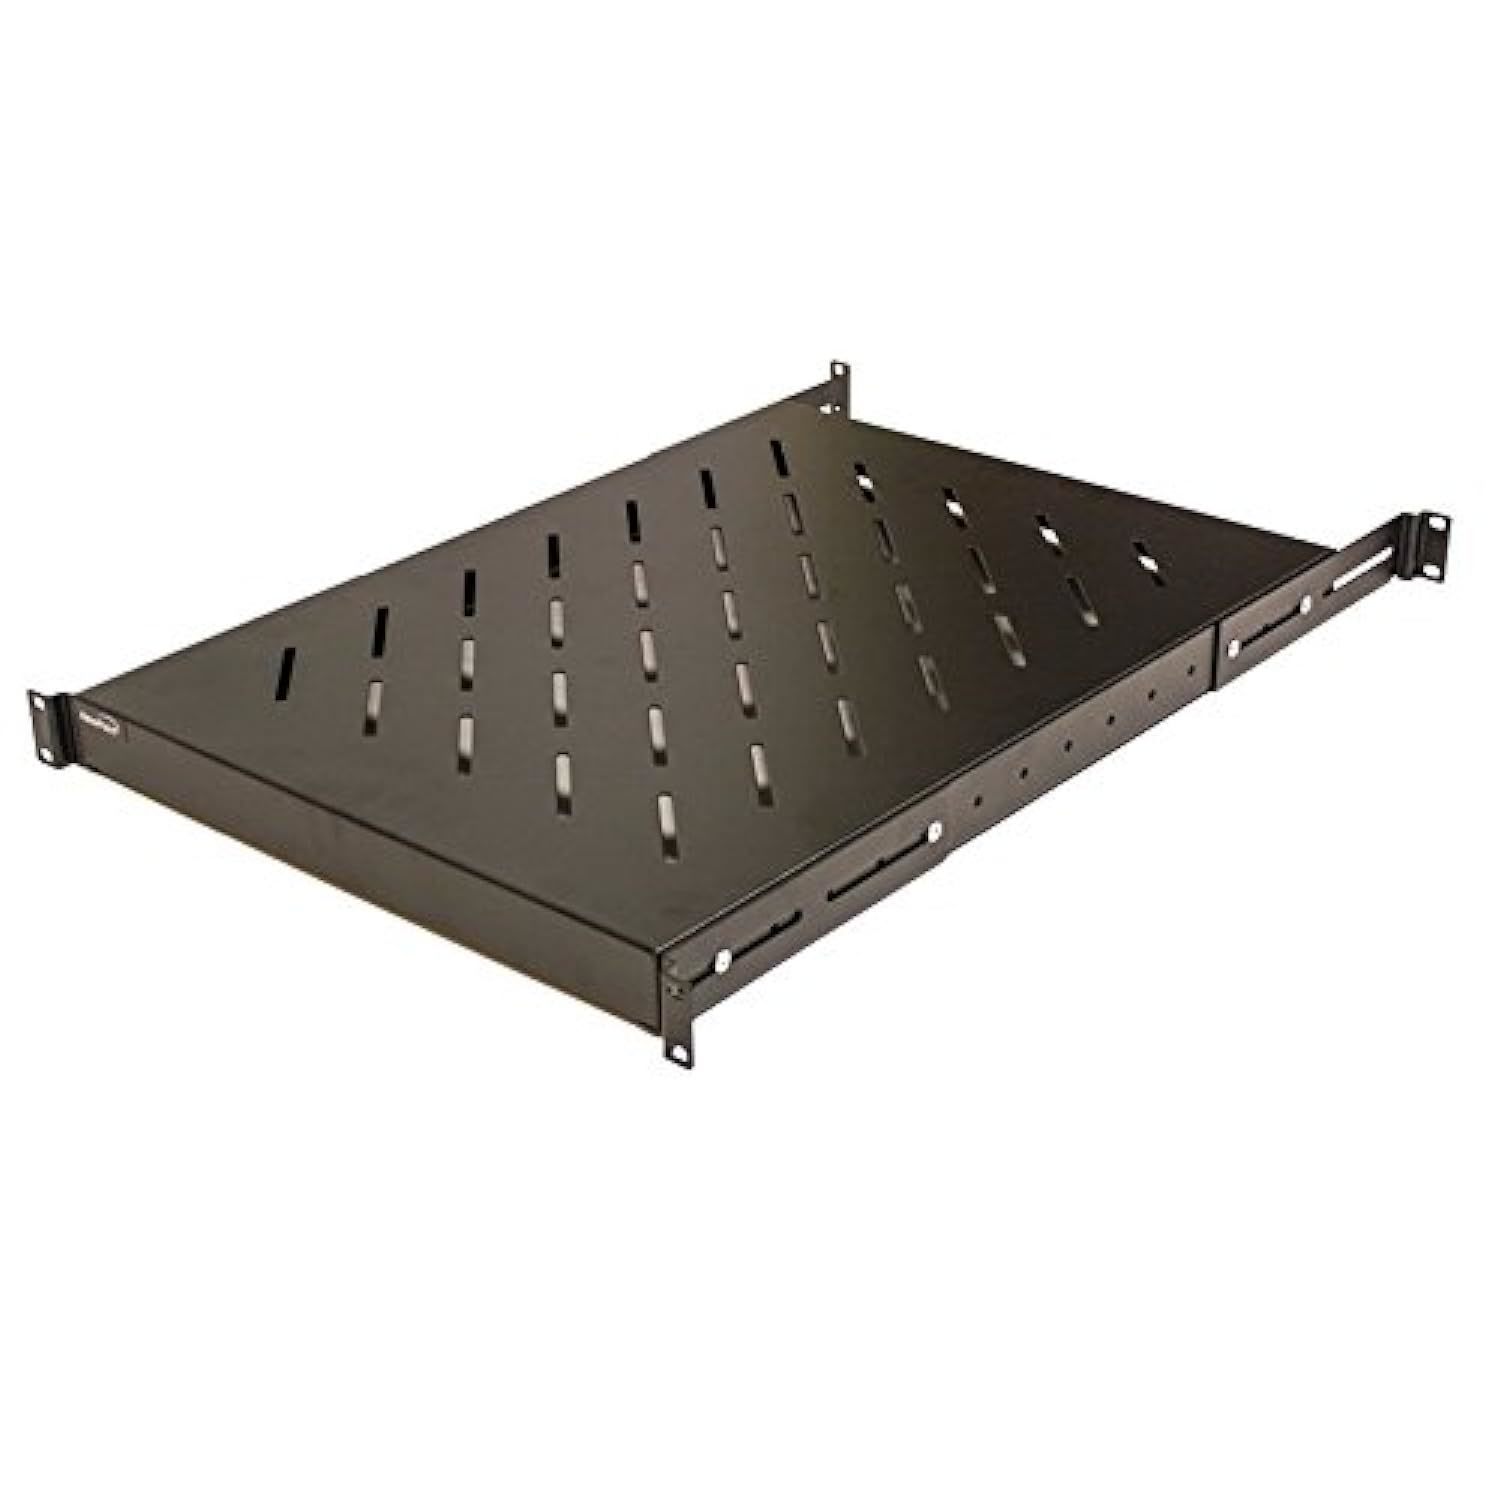 Primary image for NavePoint 1U 19-Inch Fixed 4-Post Rack Mount Server Shelf with Adjustable Depth 